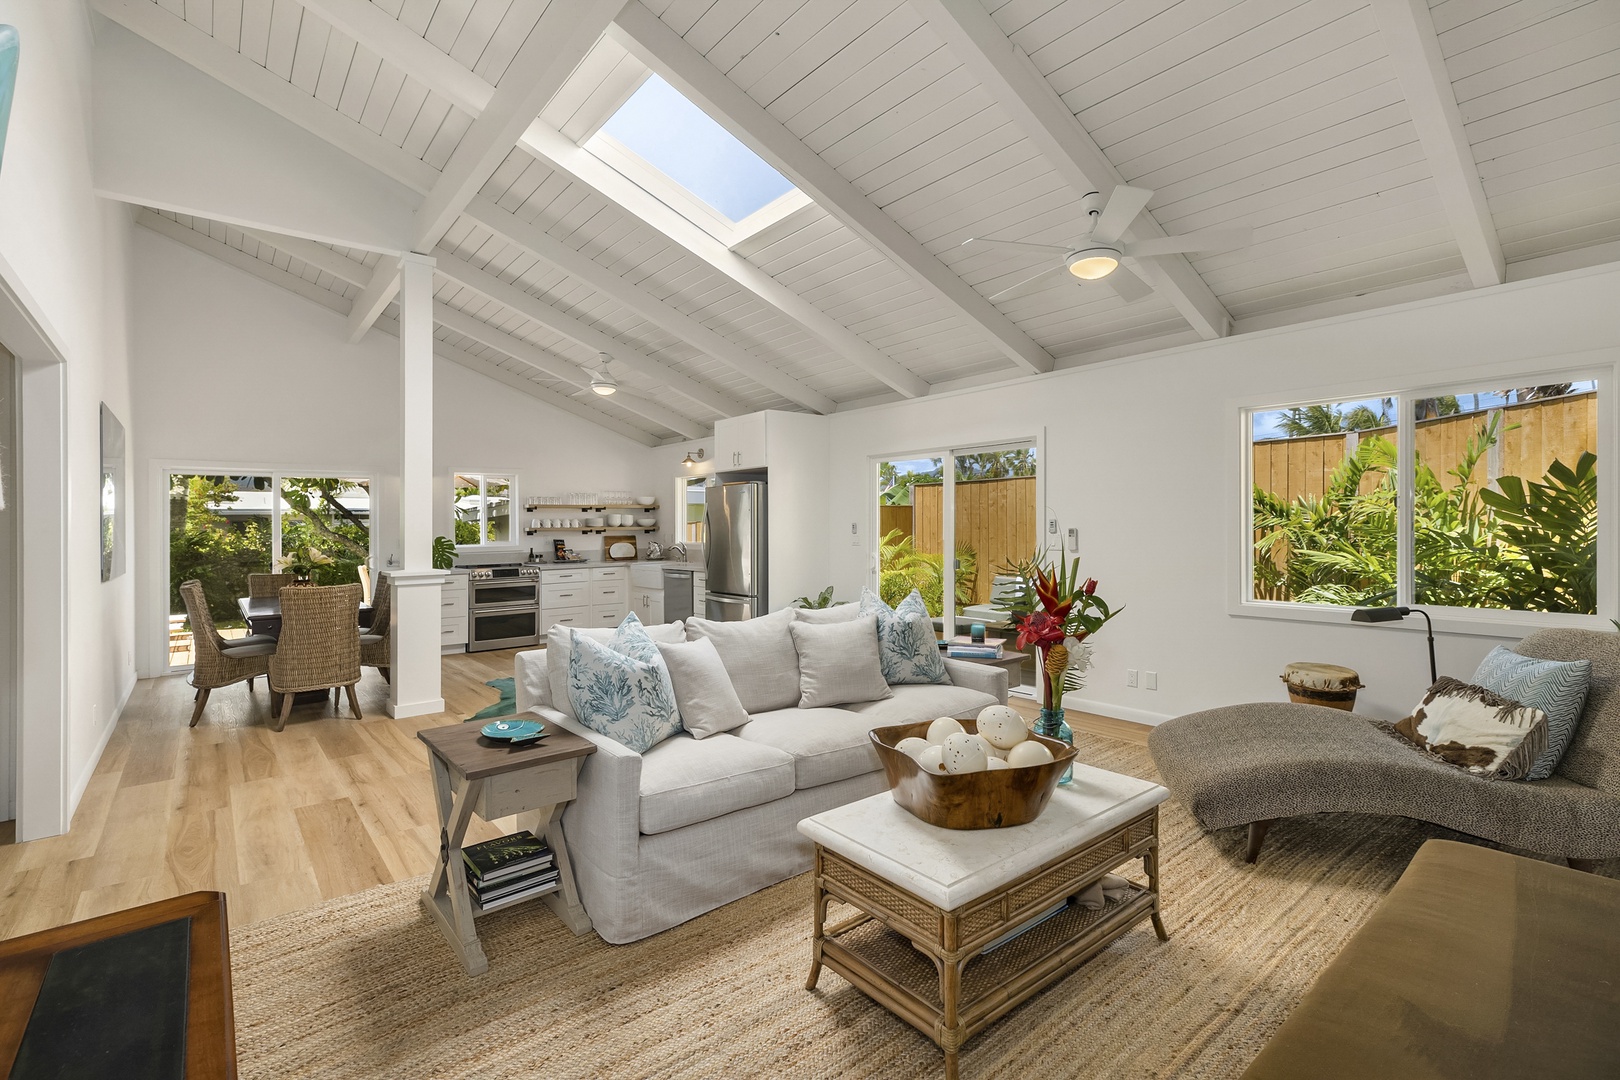 Kailua Vacation Rentals, Ranch Beach Estate - Back House Living Room with Vaulted Ceilings and Open Floor Plan